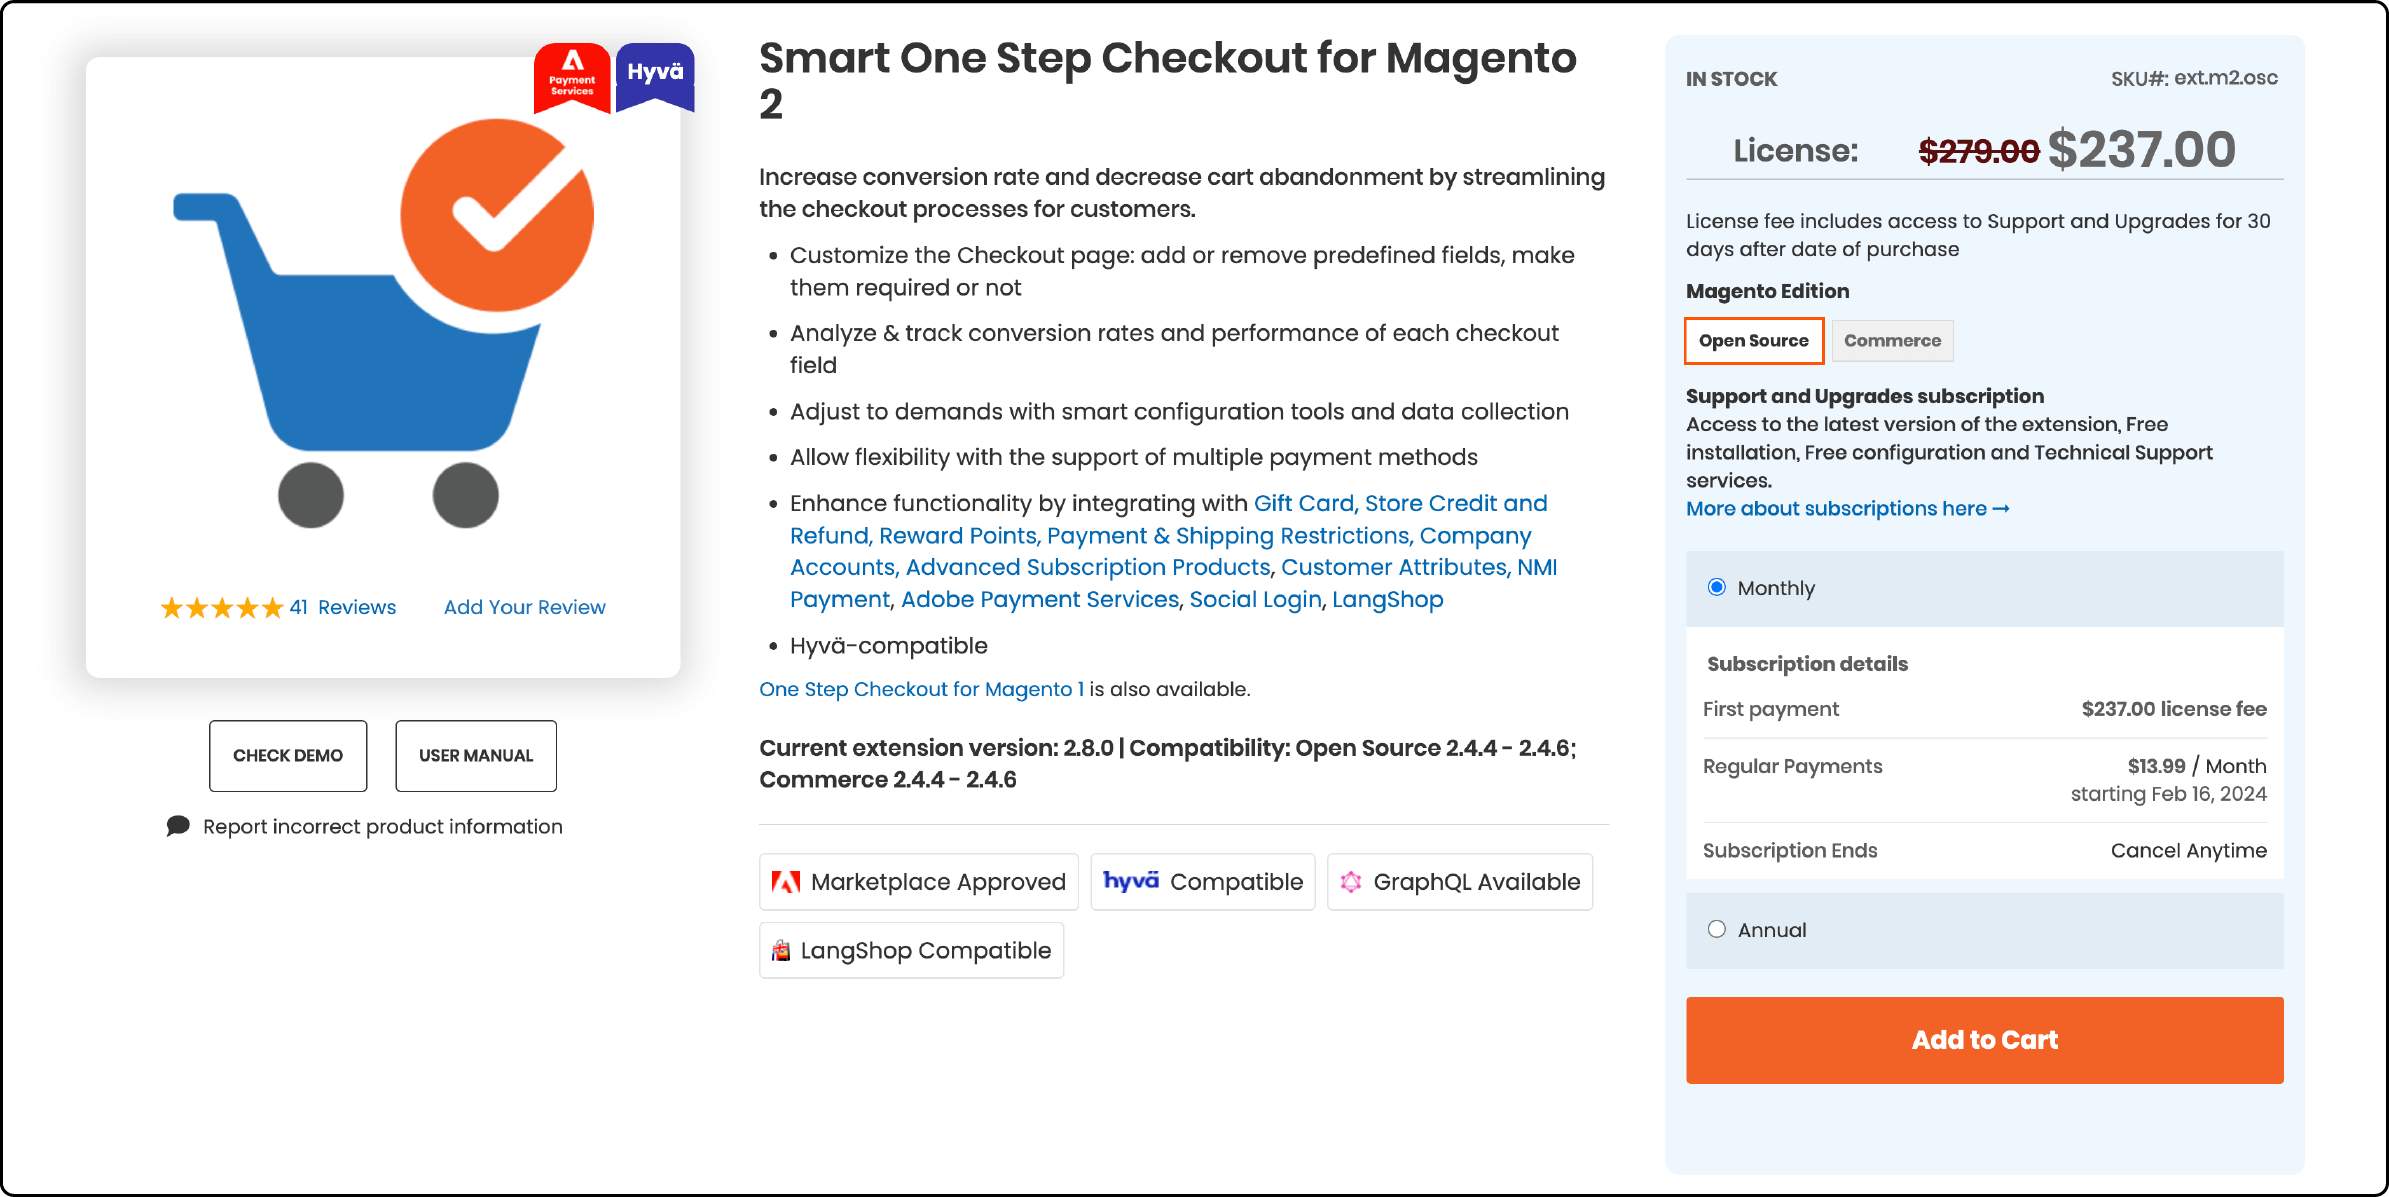 Display of Aheadworks Smart One-Step Checkout for Magento